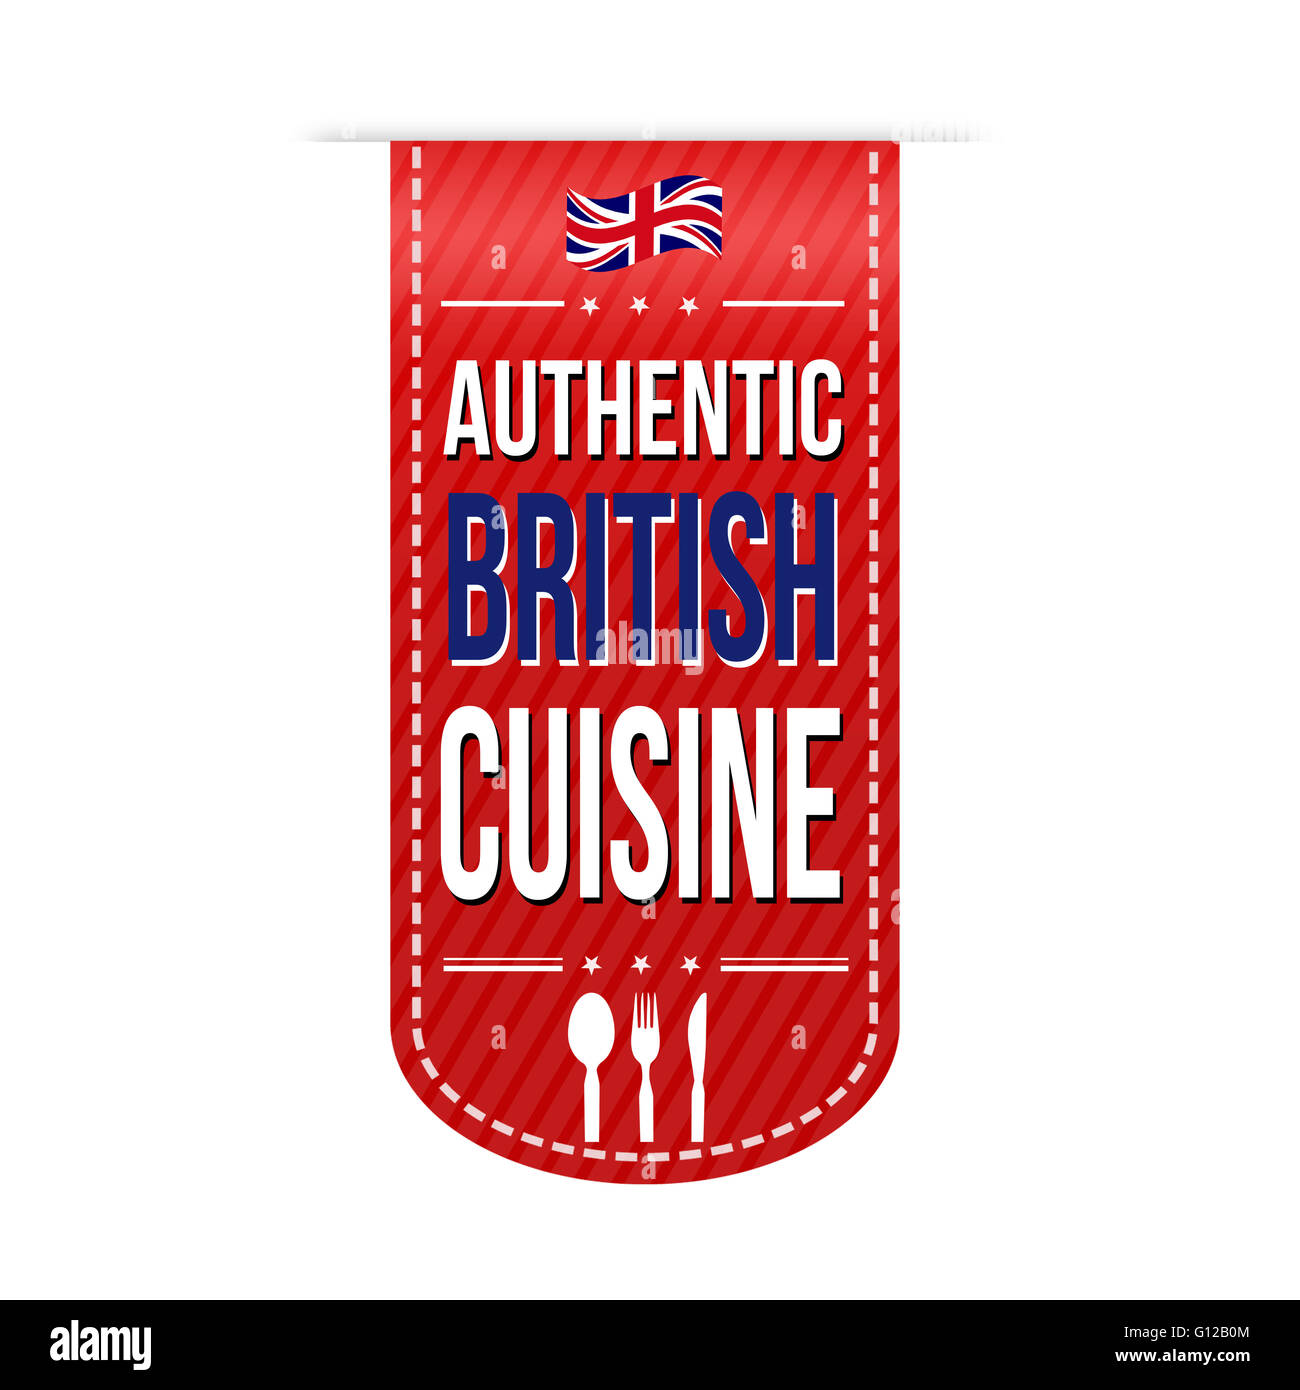 Authentic british cuisine banner design over a white background, vector illustration Stock Photo